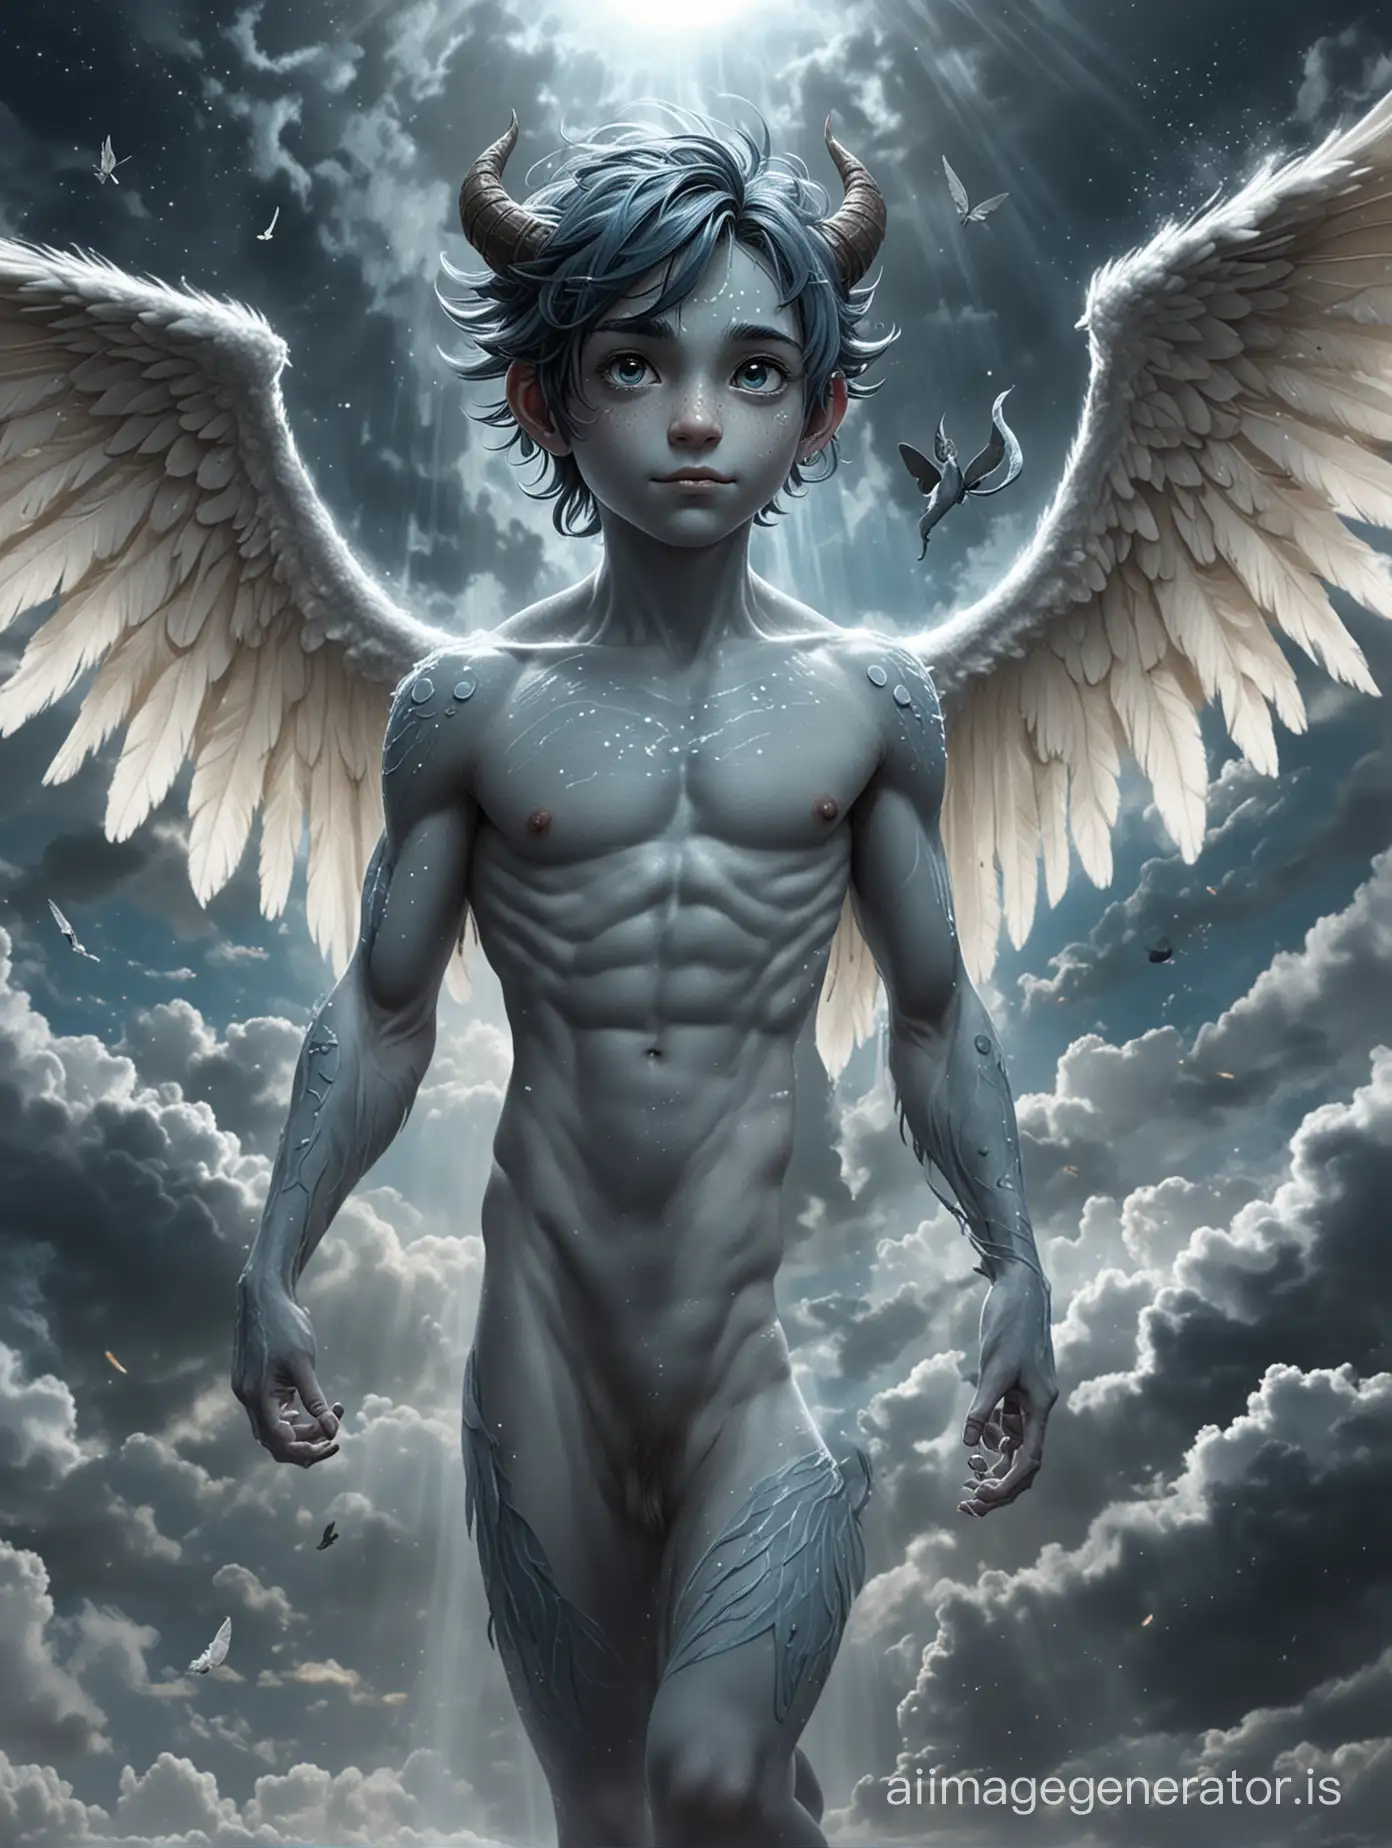 A young male water spirit with humanoid proportions, a cute boyish face, a tail, and large wings. He flies naked in the cloudy night sky. Shows the whole male juvenile in a long shot. He has smooth grey-blue skin with freckles. He is thin. On the forehead above the eyes are two horns. He has dark hair. He has claws instead of fingers and toes.
